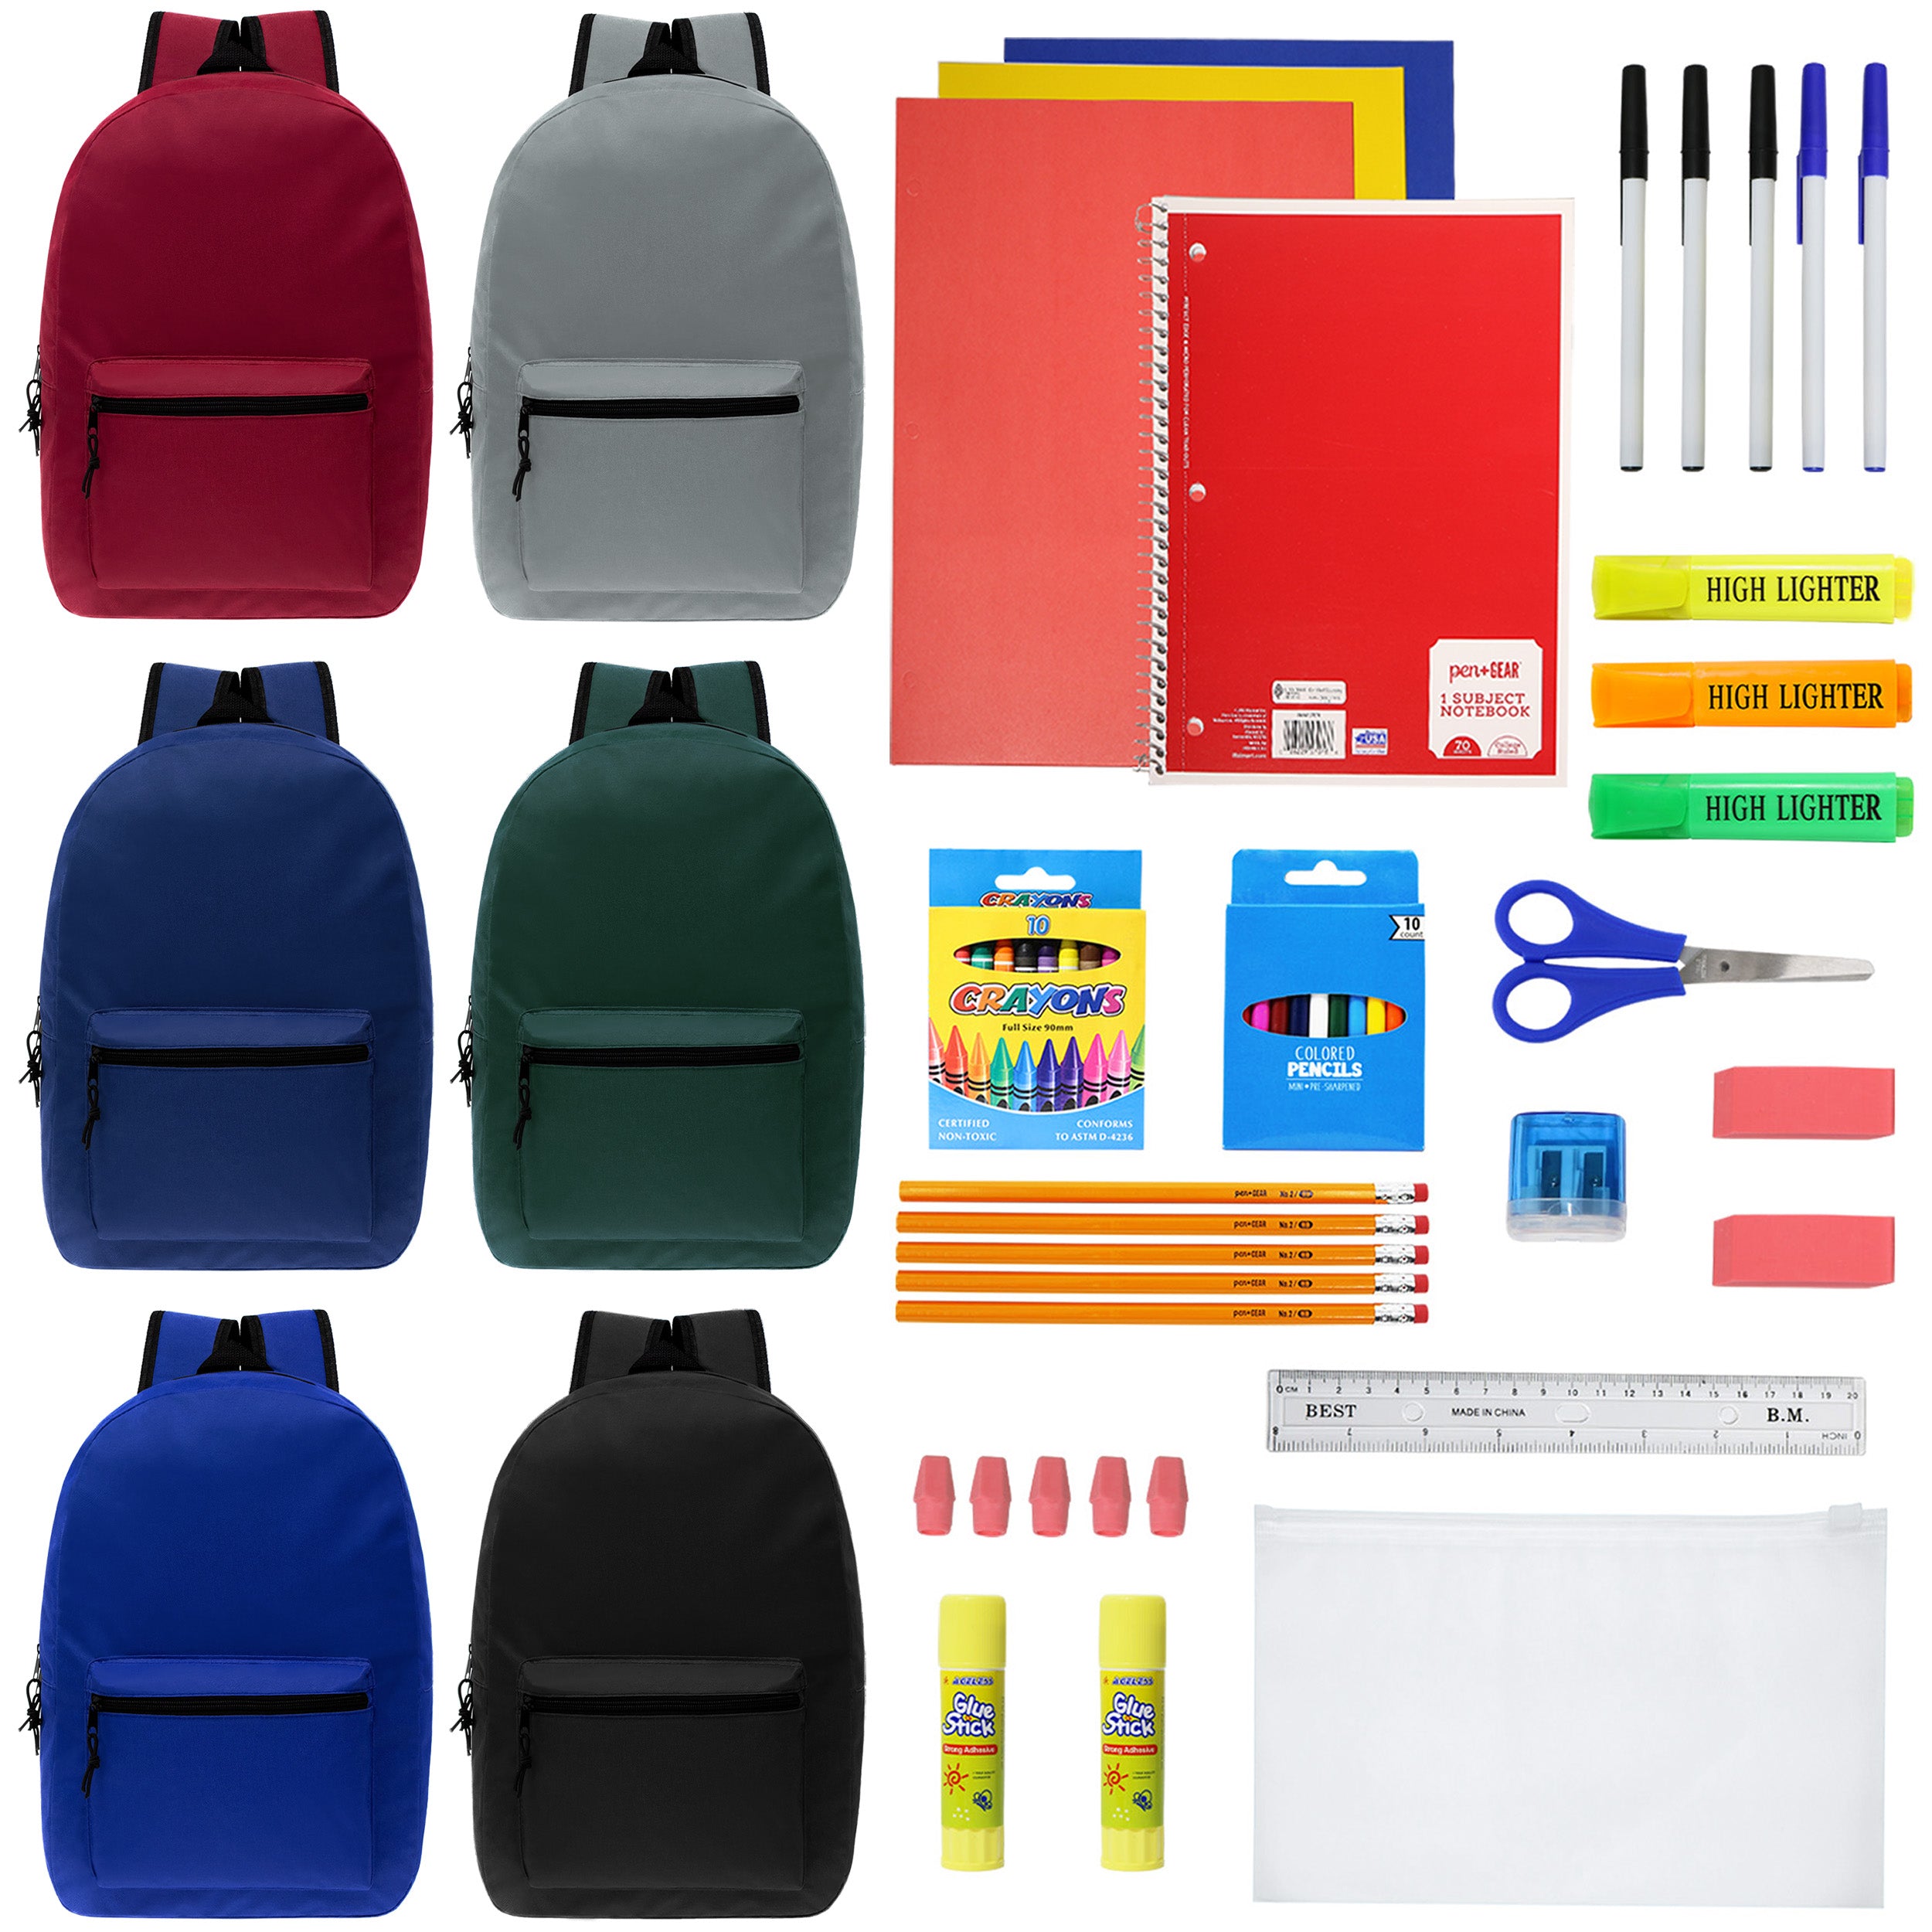 50 Piece Wholesale Basic School Supply Kit With 17 Backpack - Bulk Case of  12 Backpacks and Kits